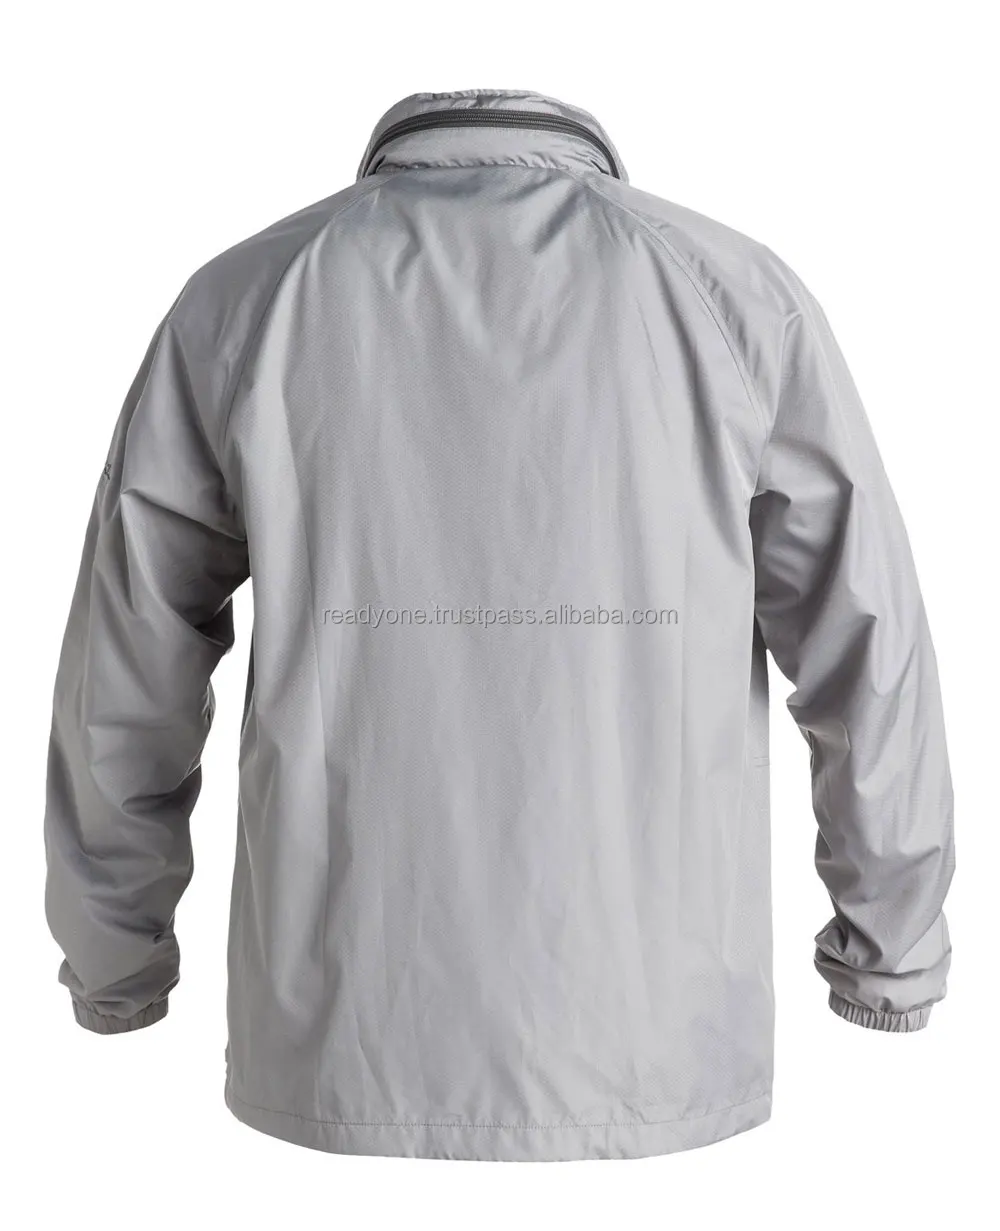 3 In 1 high quality water proof winter windbreaker wholesale cotton polyfill